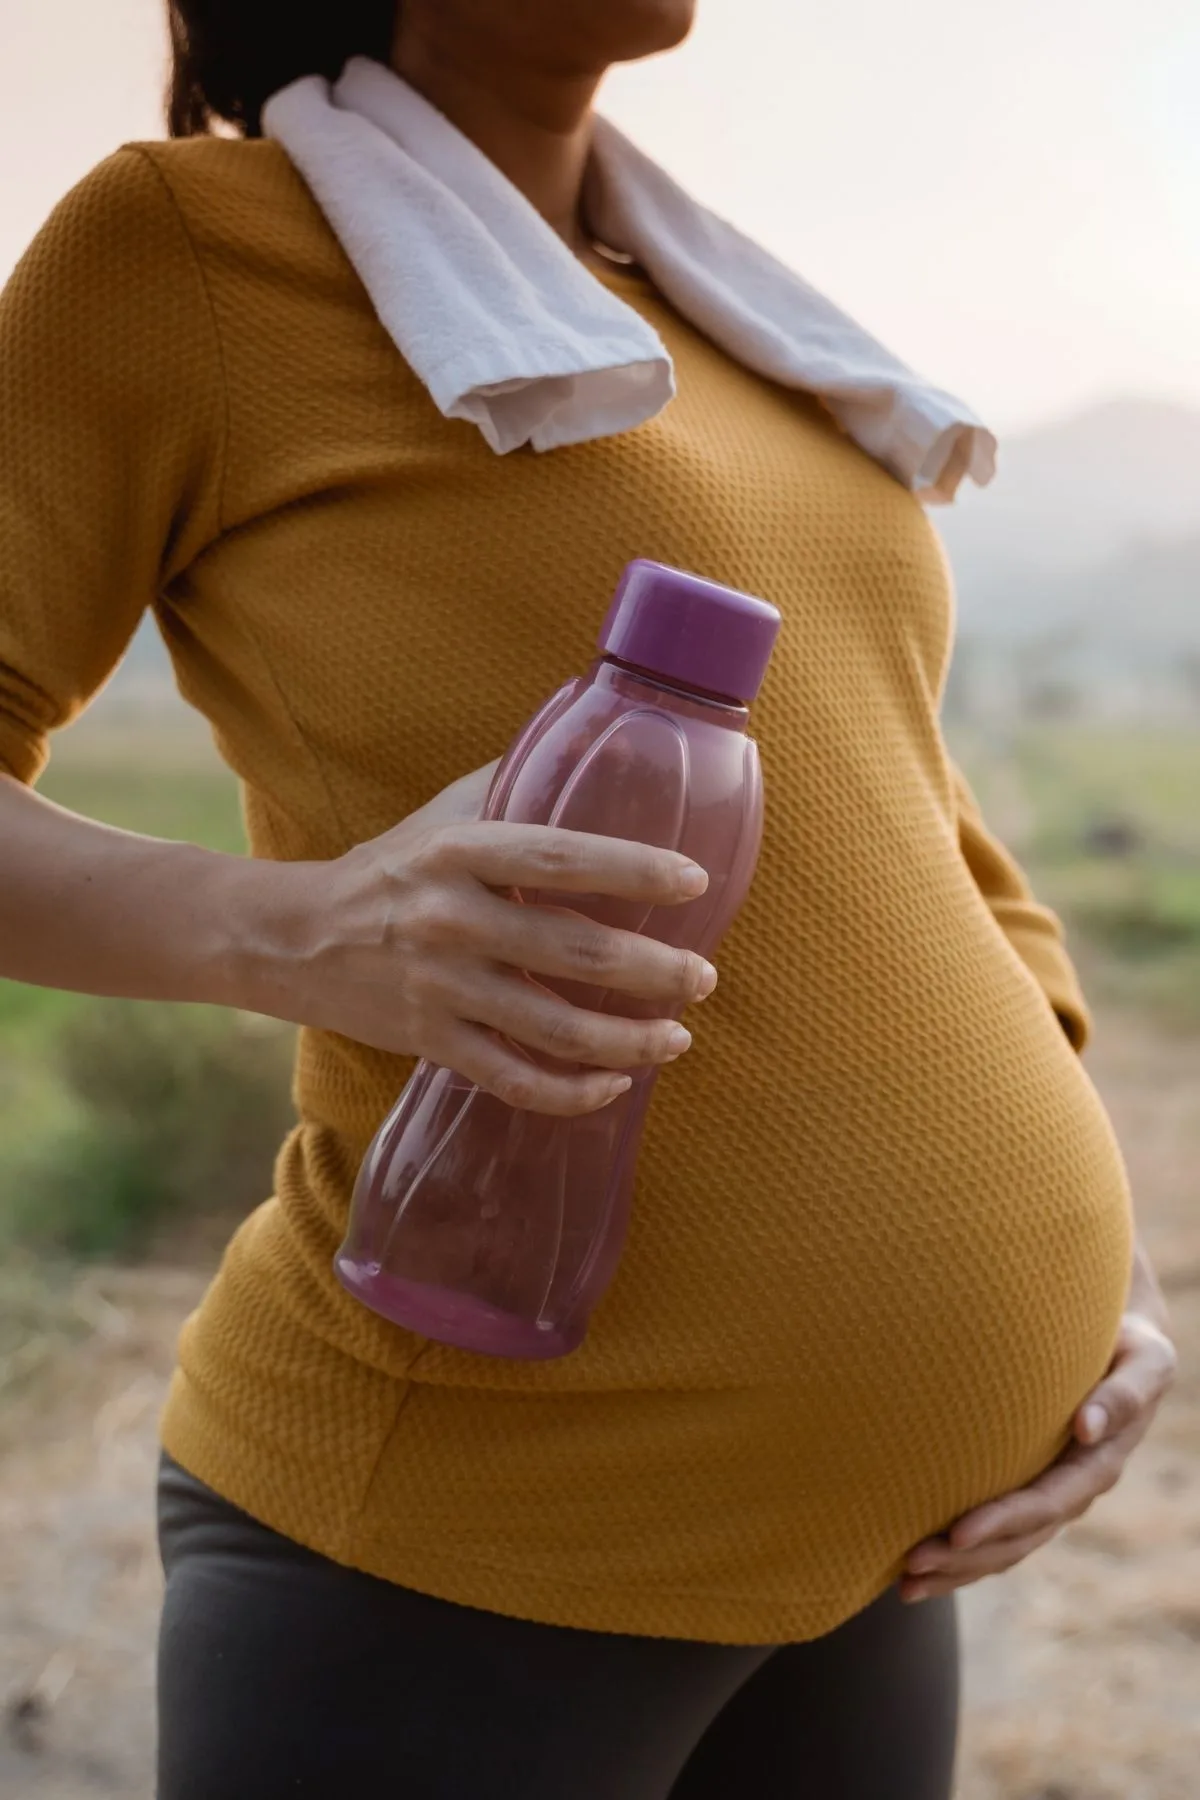 Pregnant woman holds water bottle and cradles baby bump while resting during a hike.